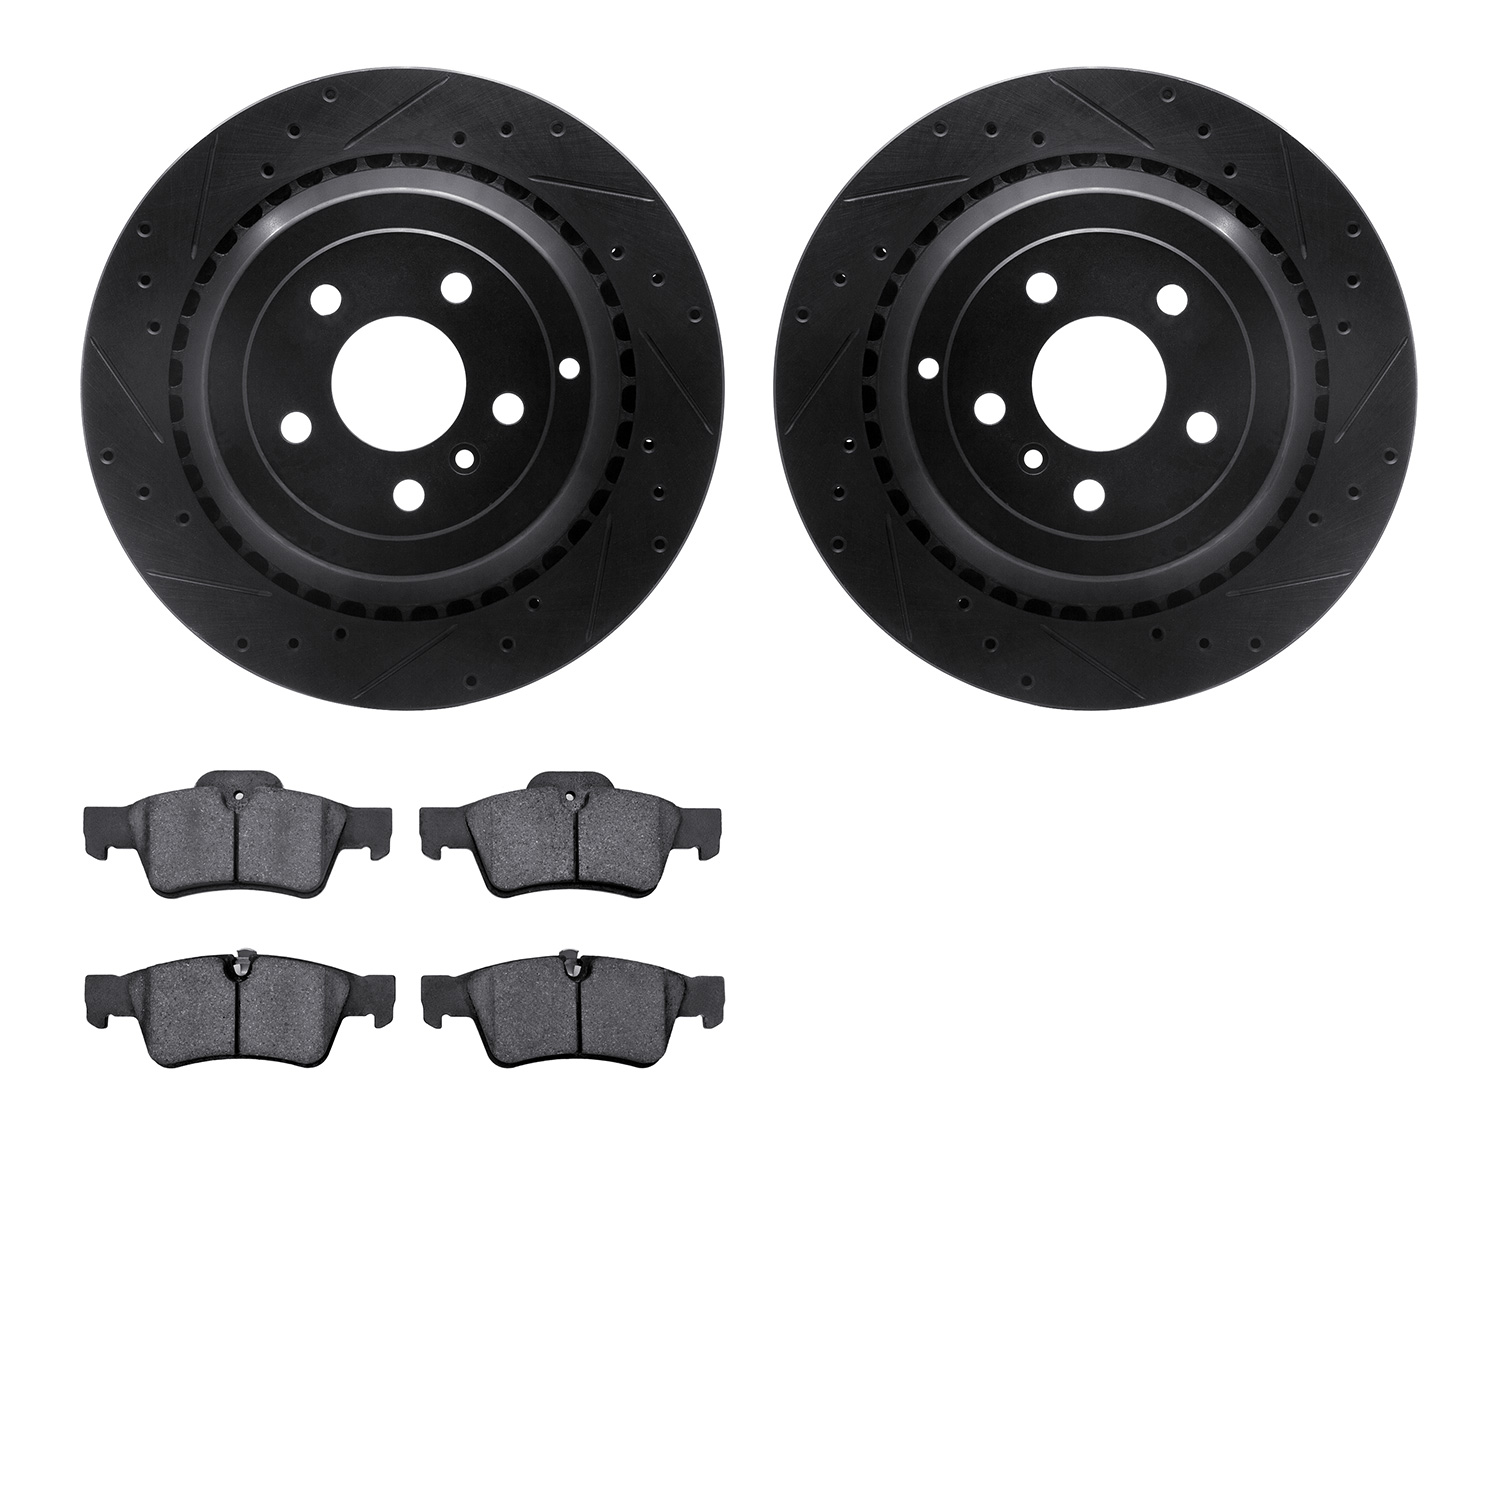 8302-63107 Drilled/Slotted Brake Rotors with 3000-Series Ceramic Brake Pads Kit [Black], 2006-2012 Mercedes-Benz, Position: Rear